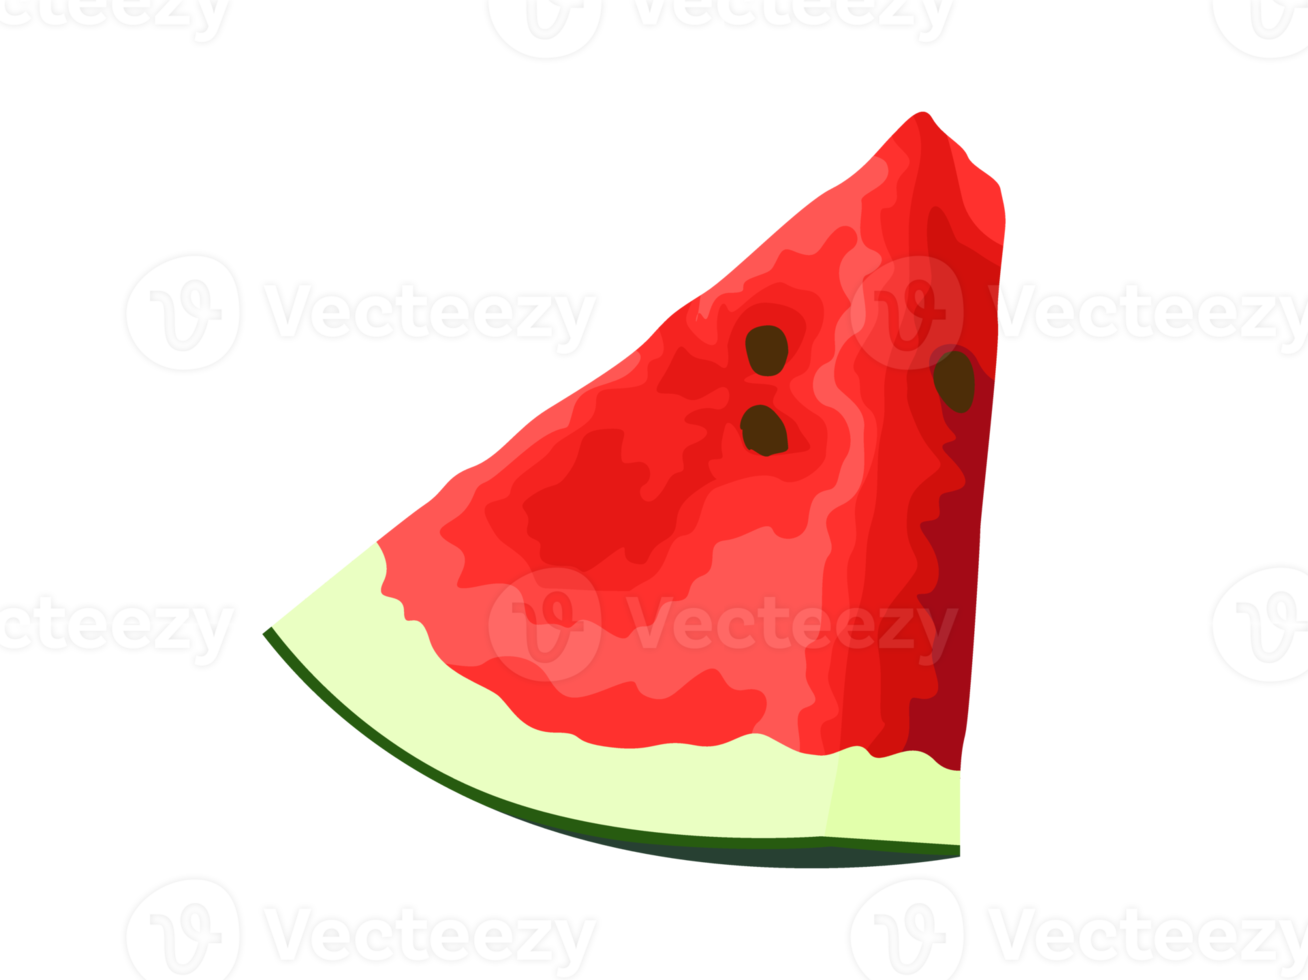 fresh watermelon slices png